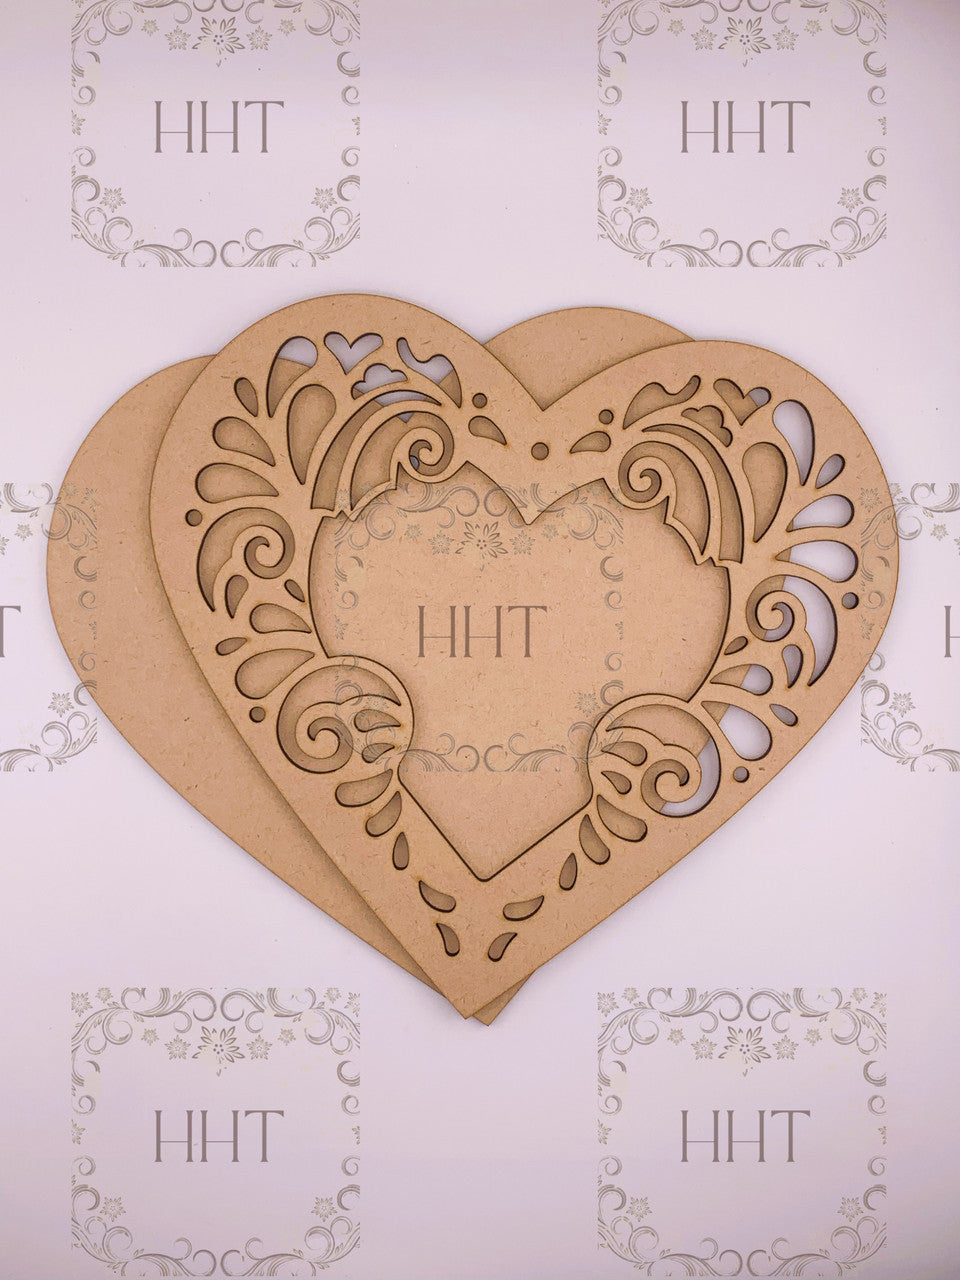 Handcrafted Holiday Traditions MDF Scrolled Heart Plaque with Overlay 2 pieces